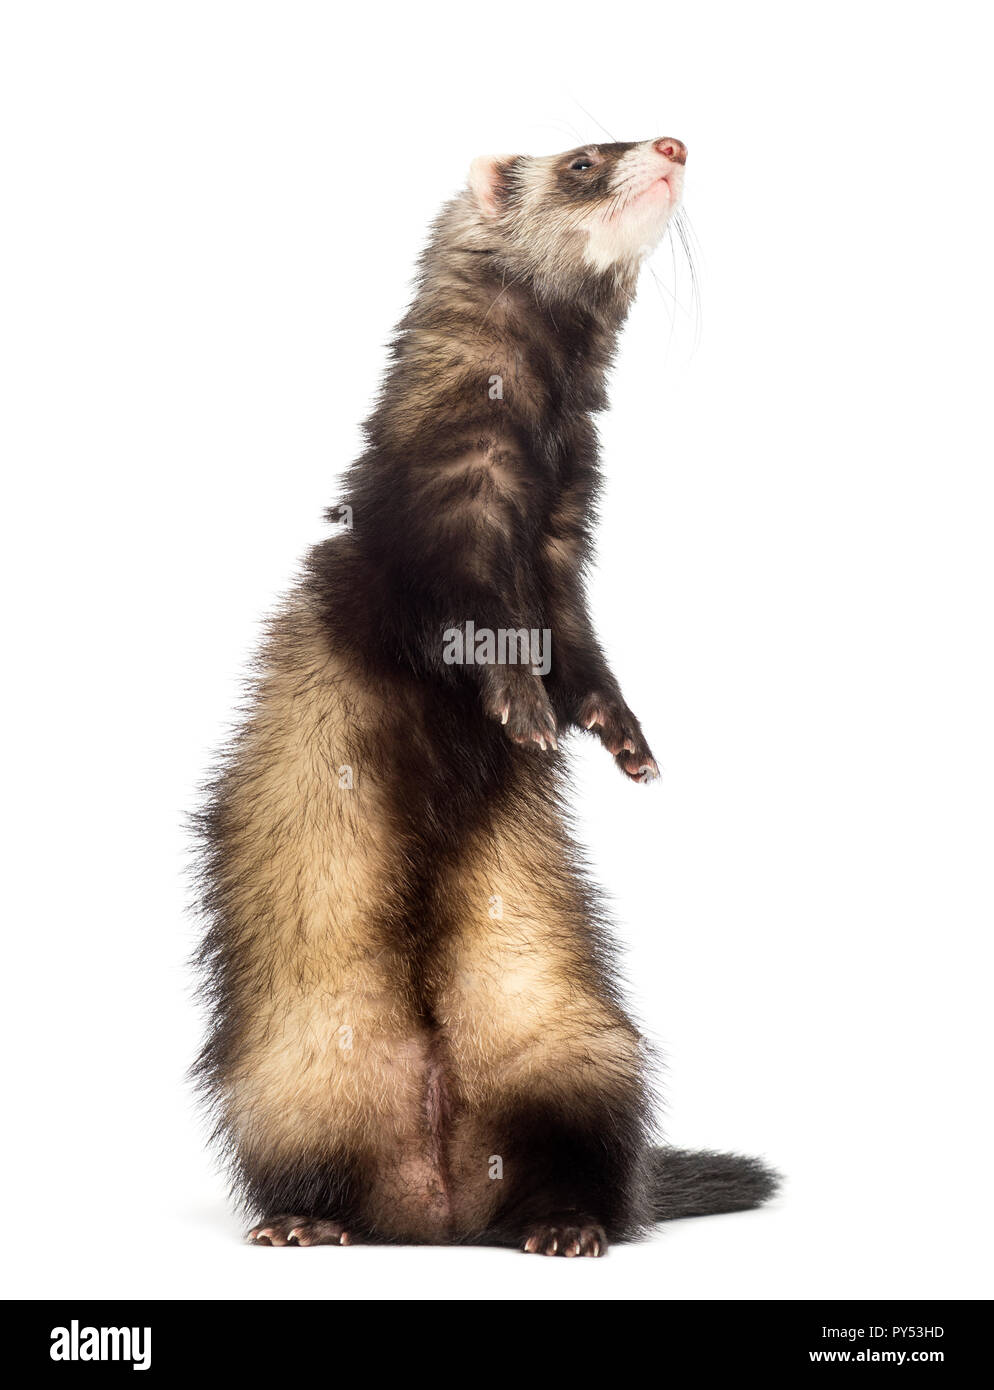 Ferret, 9 months old, standing on hind legs and looking up in front of white background Stock Photo